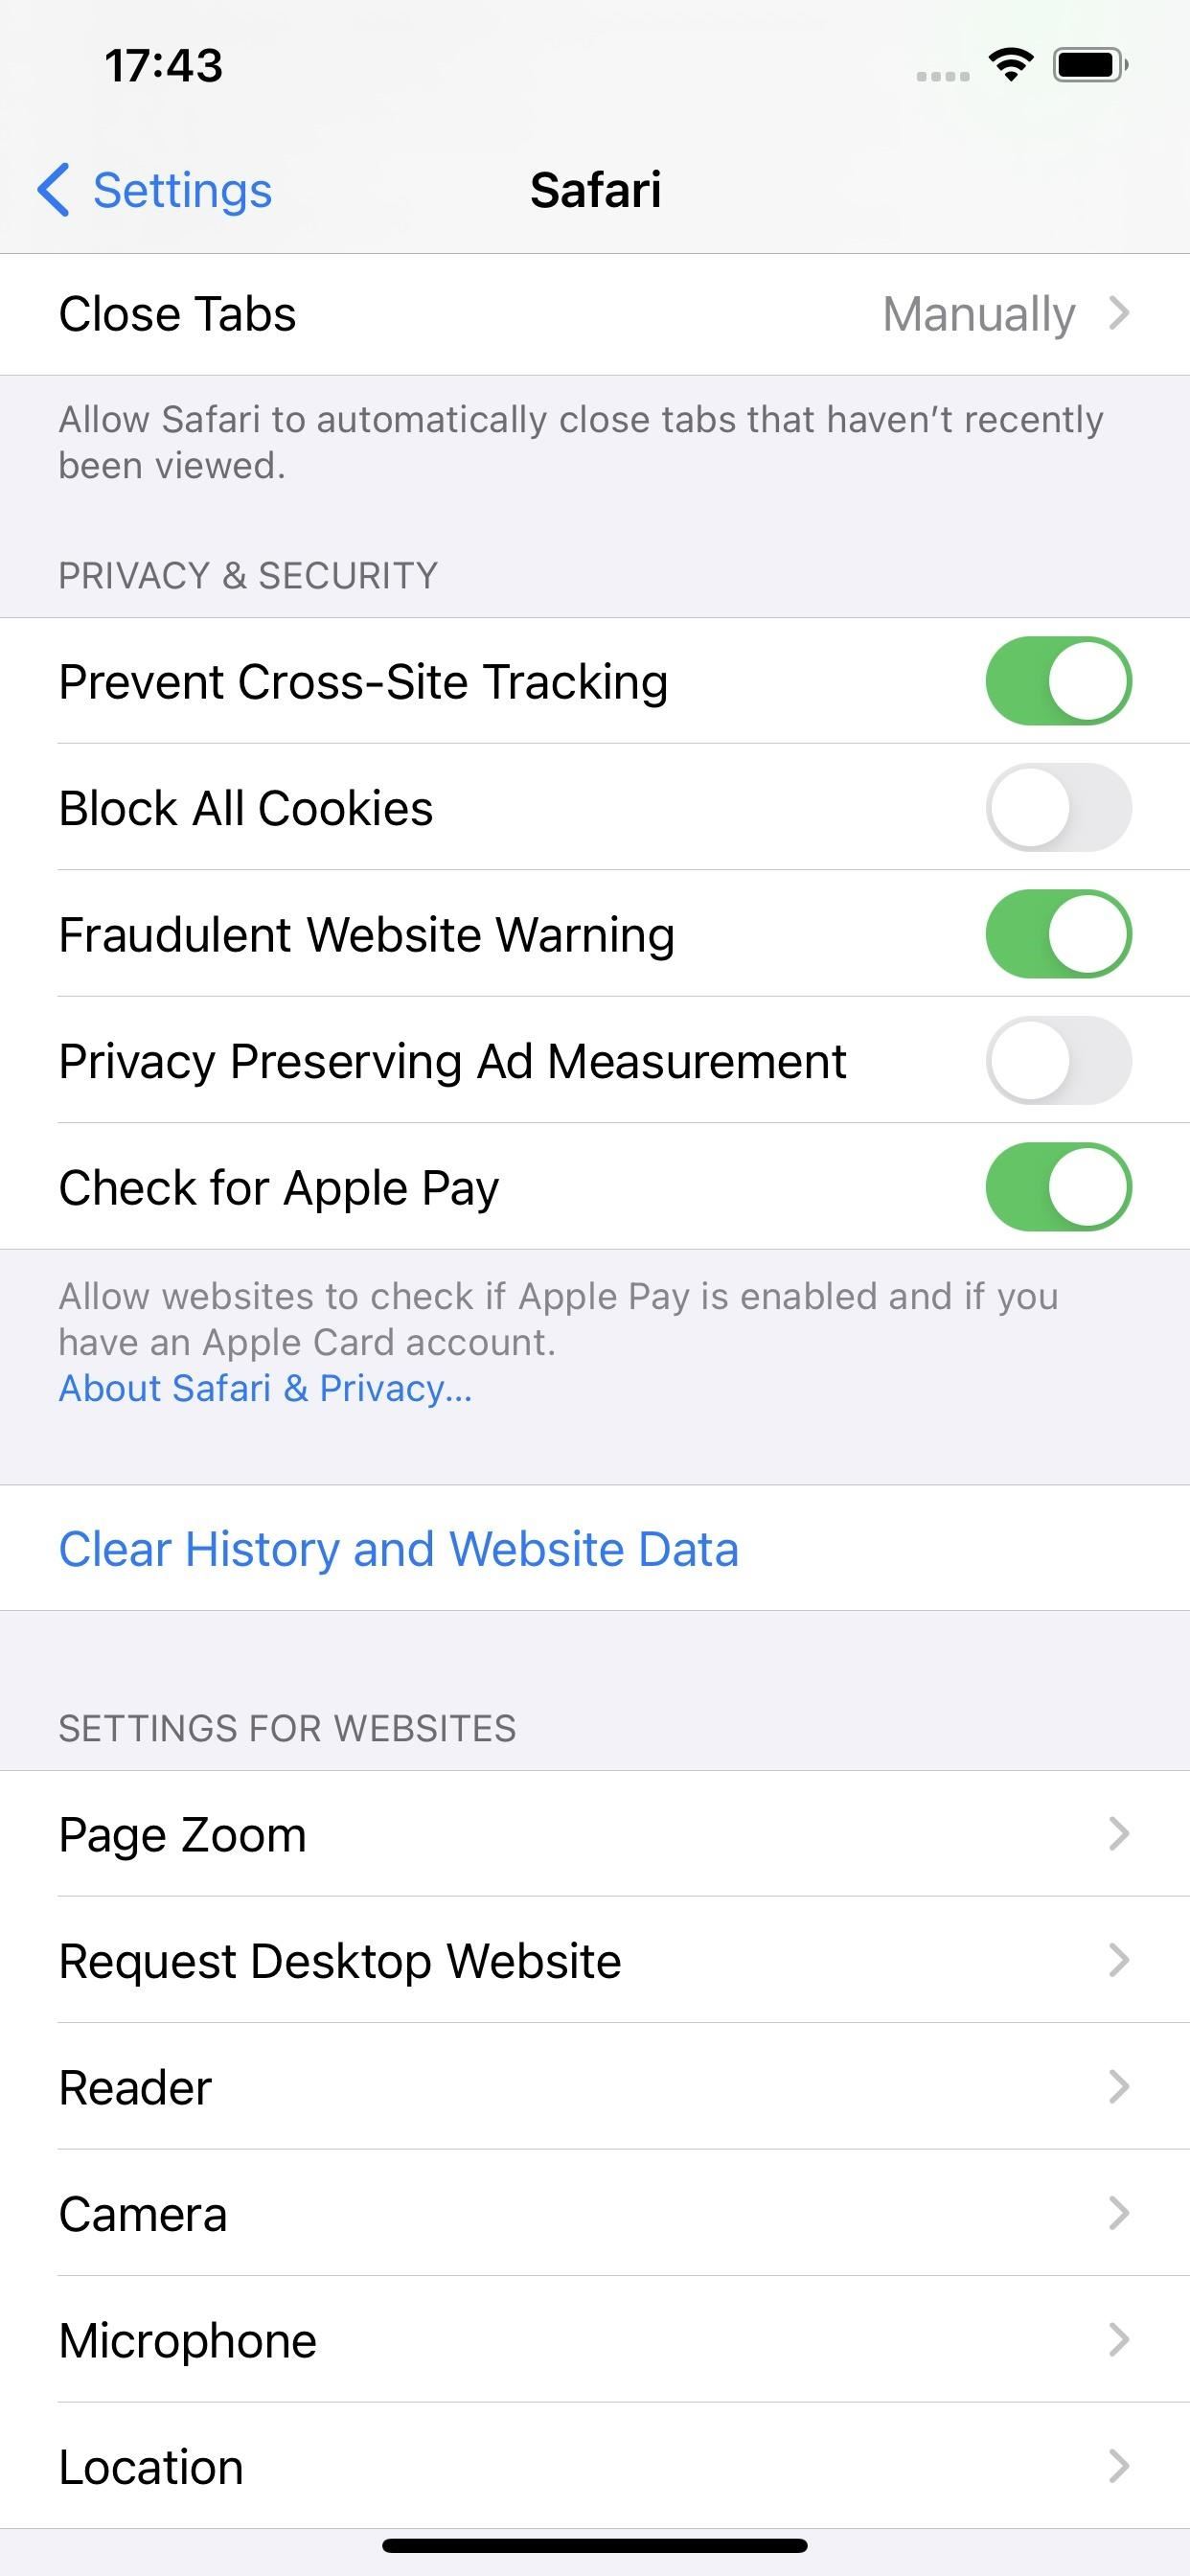 3 Reasons Why You Need iOS 14.5's New Privacy Features on Your iPhone